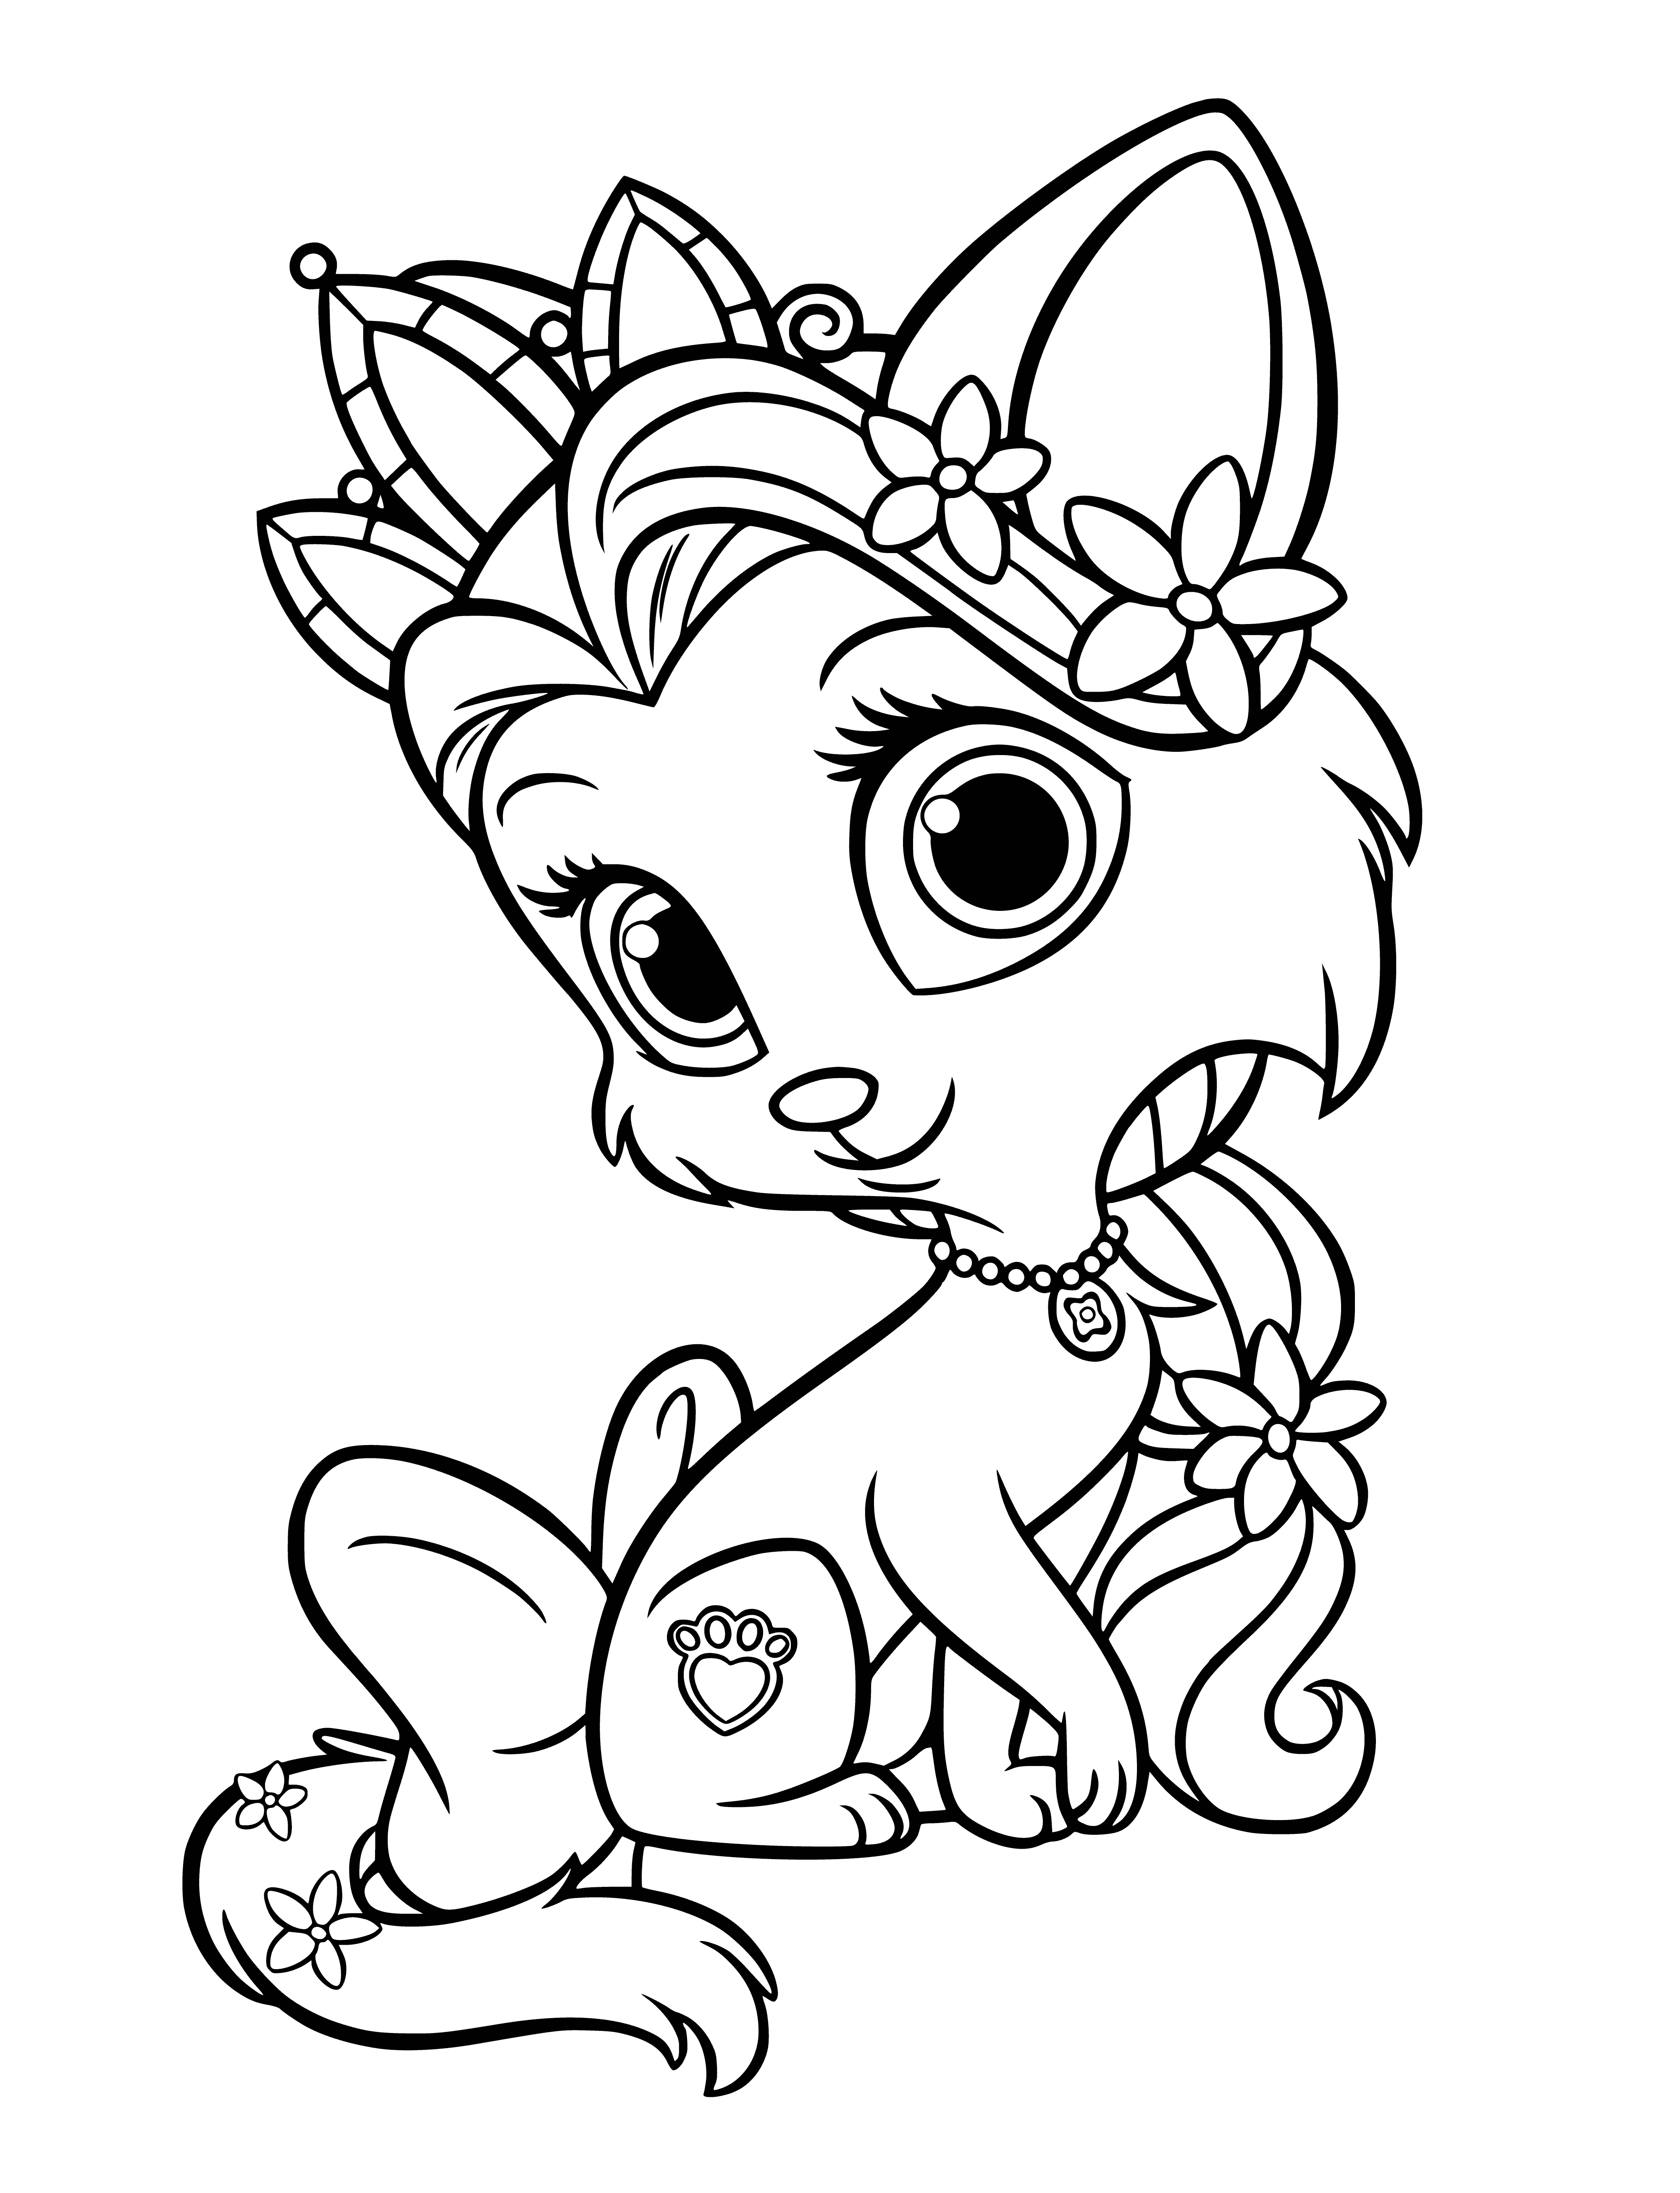 coloring page: Princess Rapunzel's pet, Sunny - a black kitten with yellow eyes - is sitting in a basket in the coloring page.